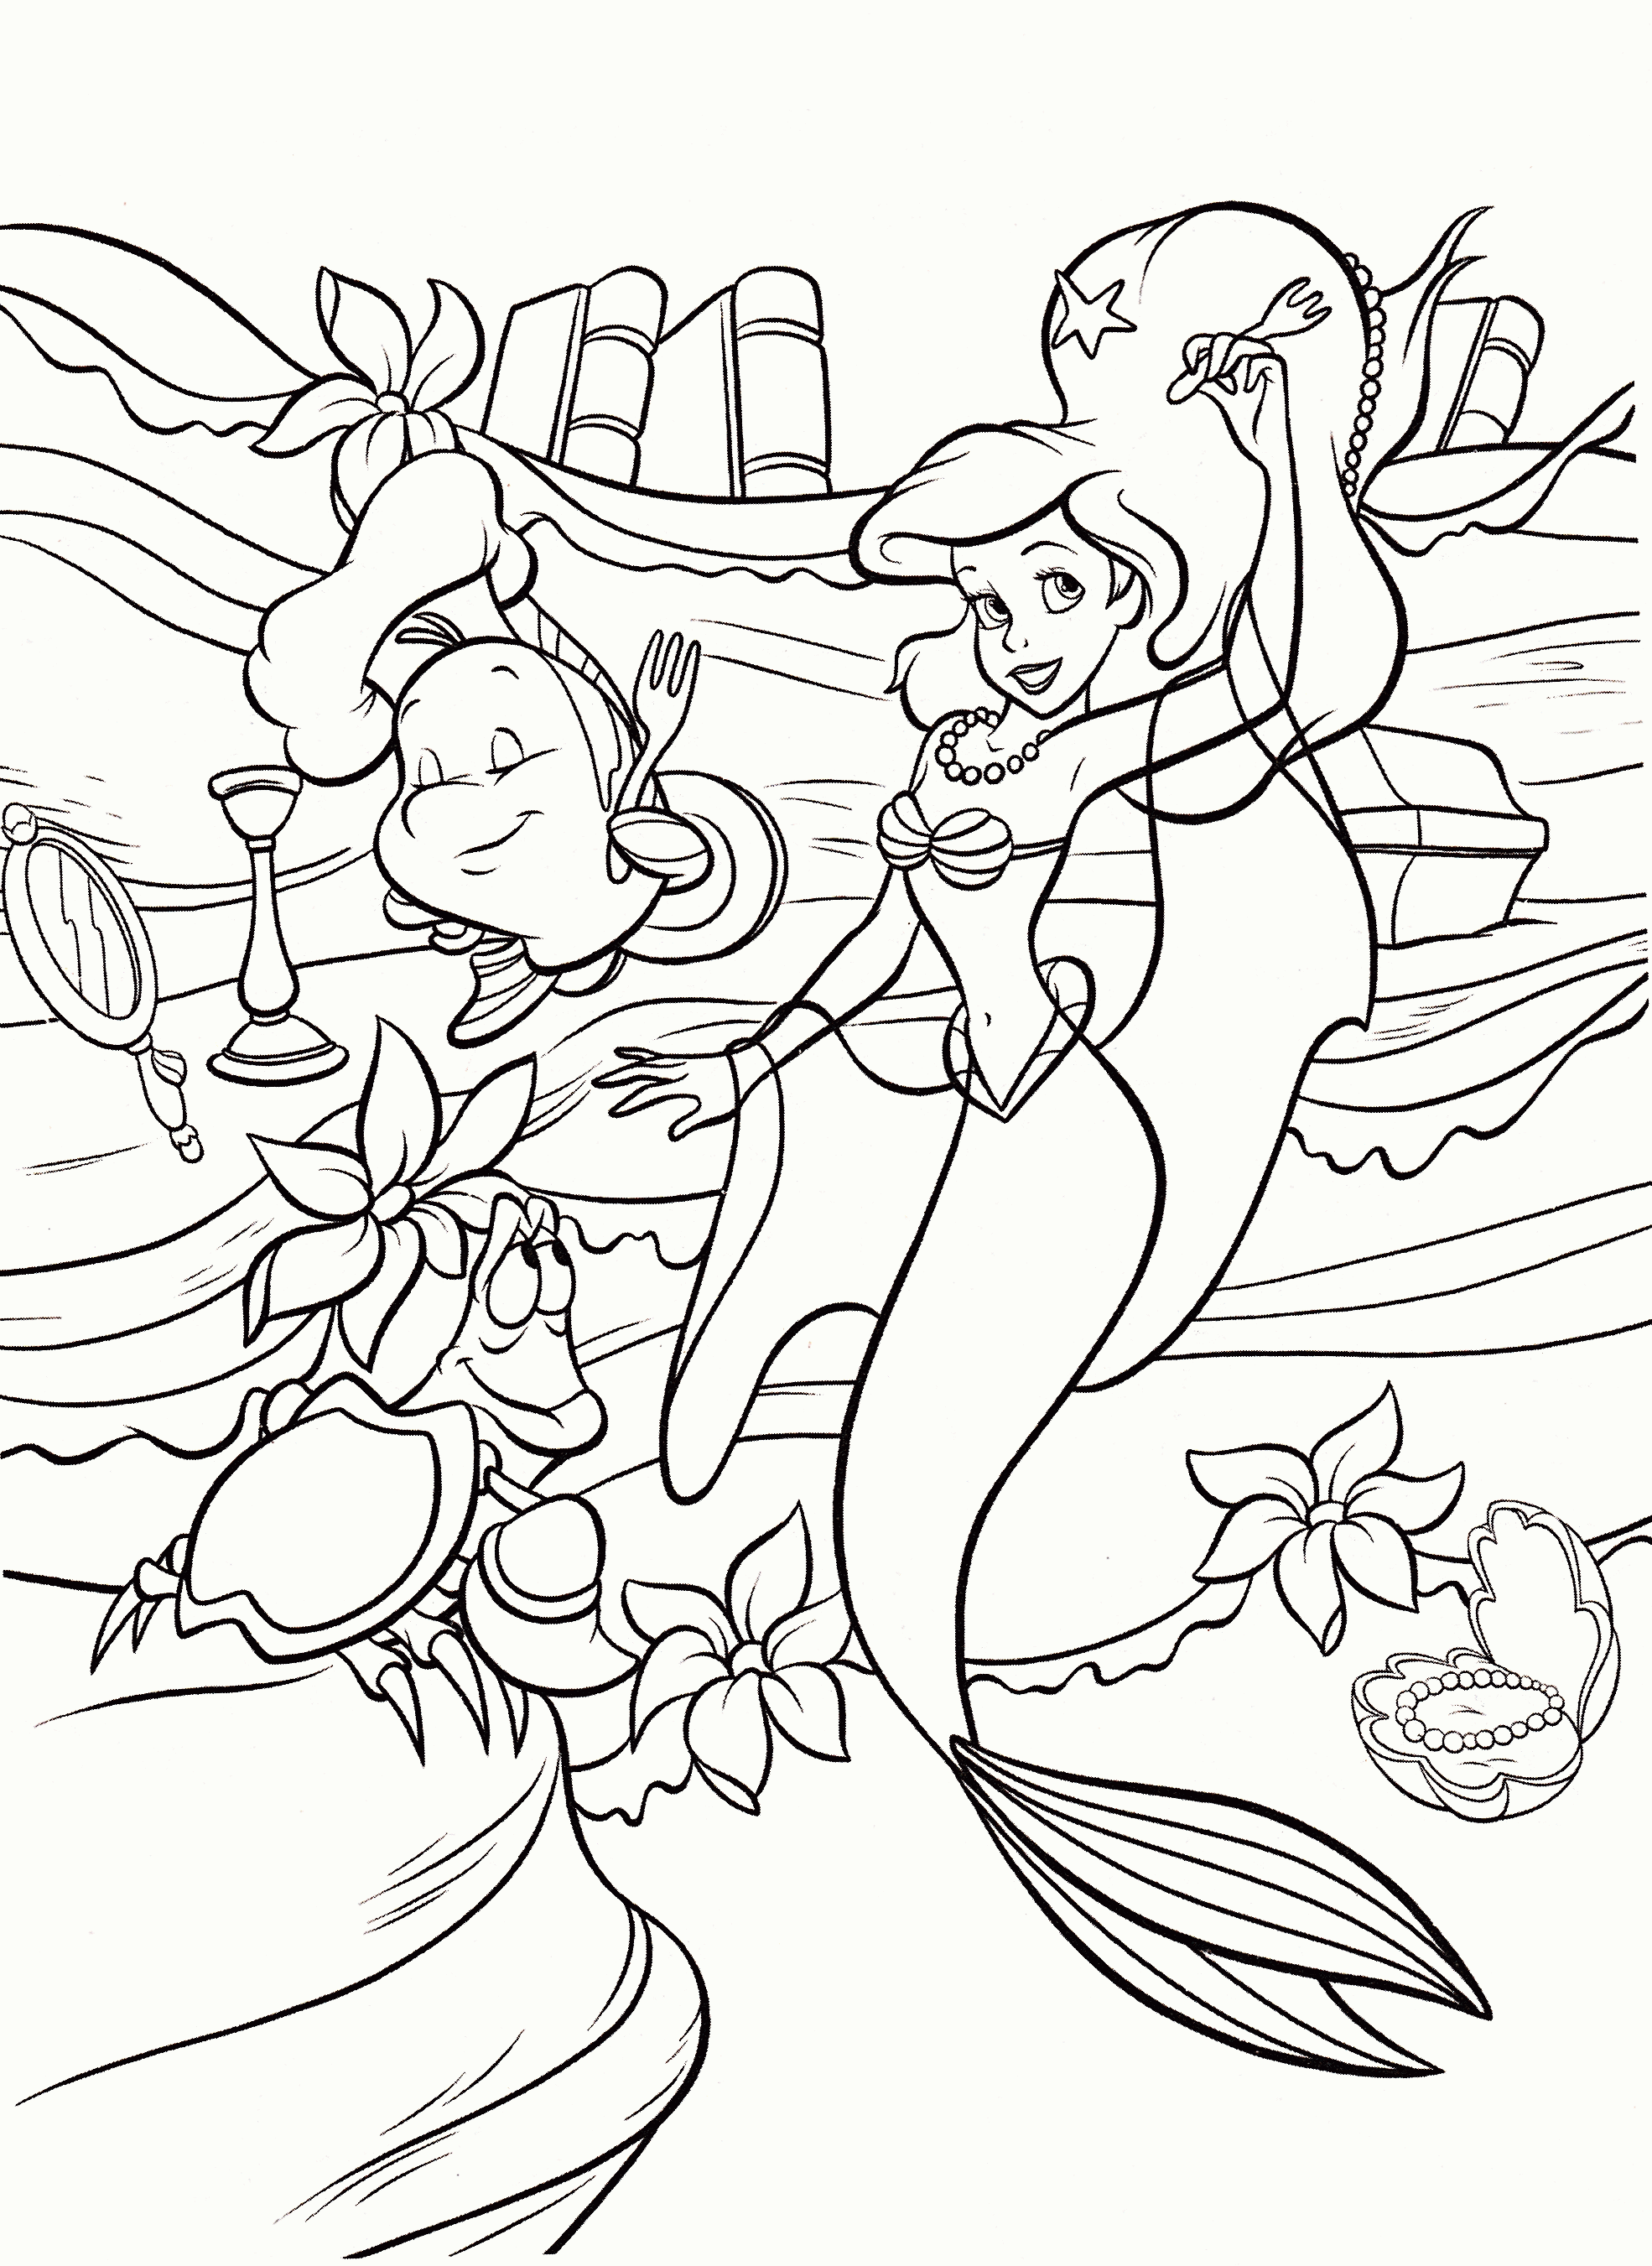 Ariel And Flounder Coloring Page   Coloring Home